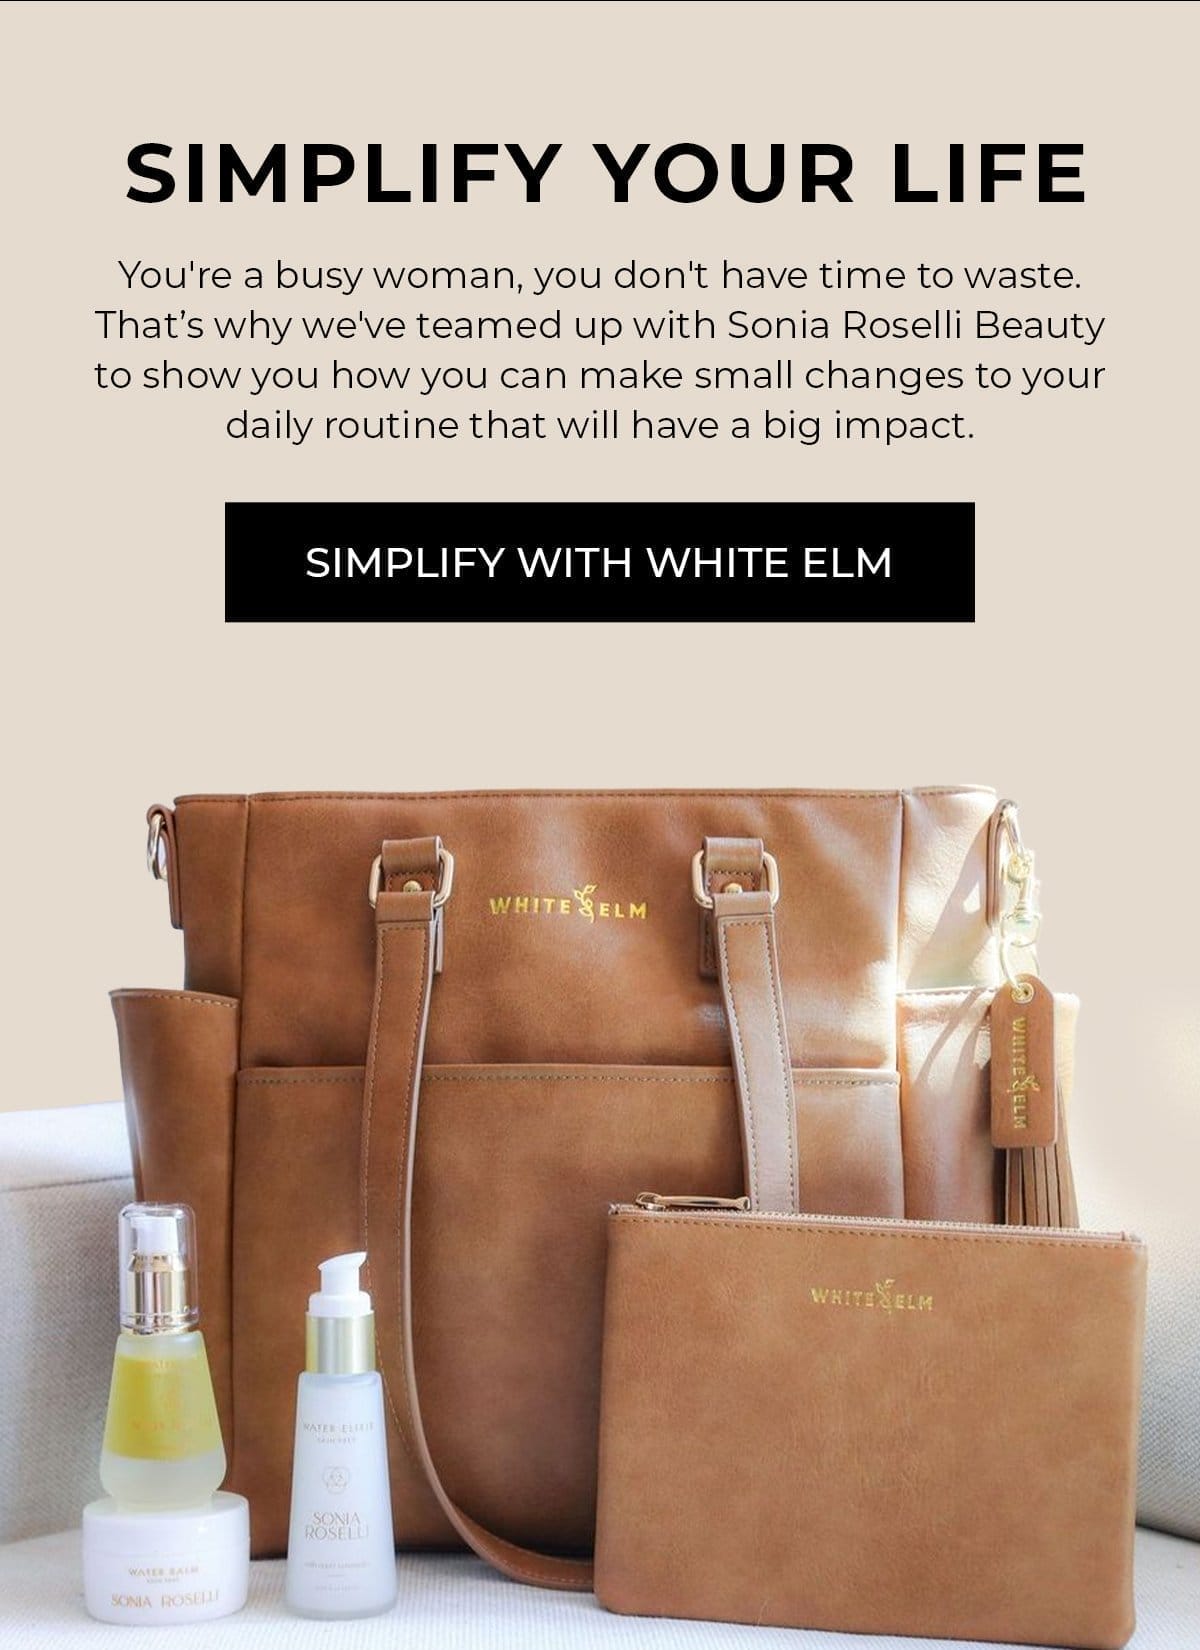 Simplify Your Life. White Elm X Sonia Roselli Beauty. You're a busy woman, you don't have time to waste. That’s why we've teamed up with Sonia Roselli Beauty to show you how you can make small changes to your daily routine that will have a big impact.